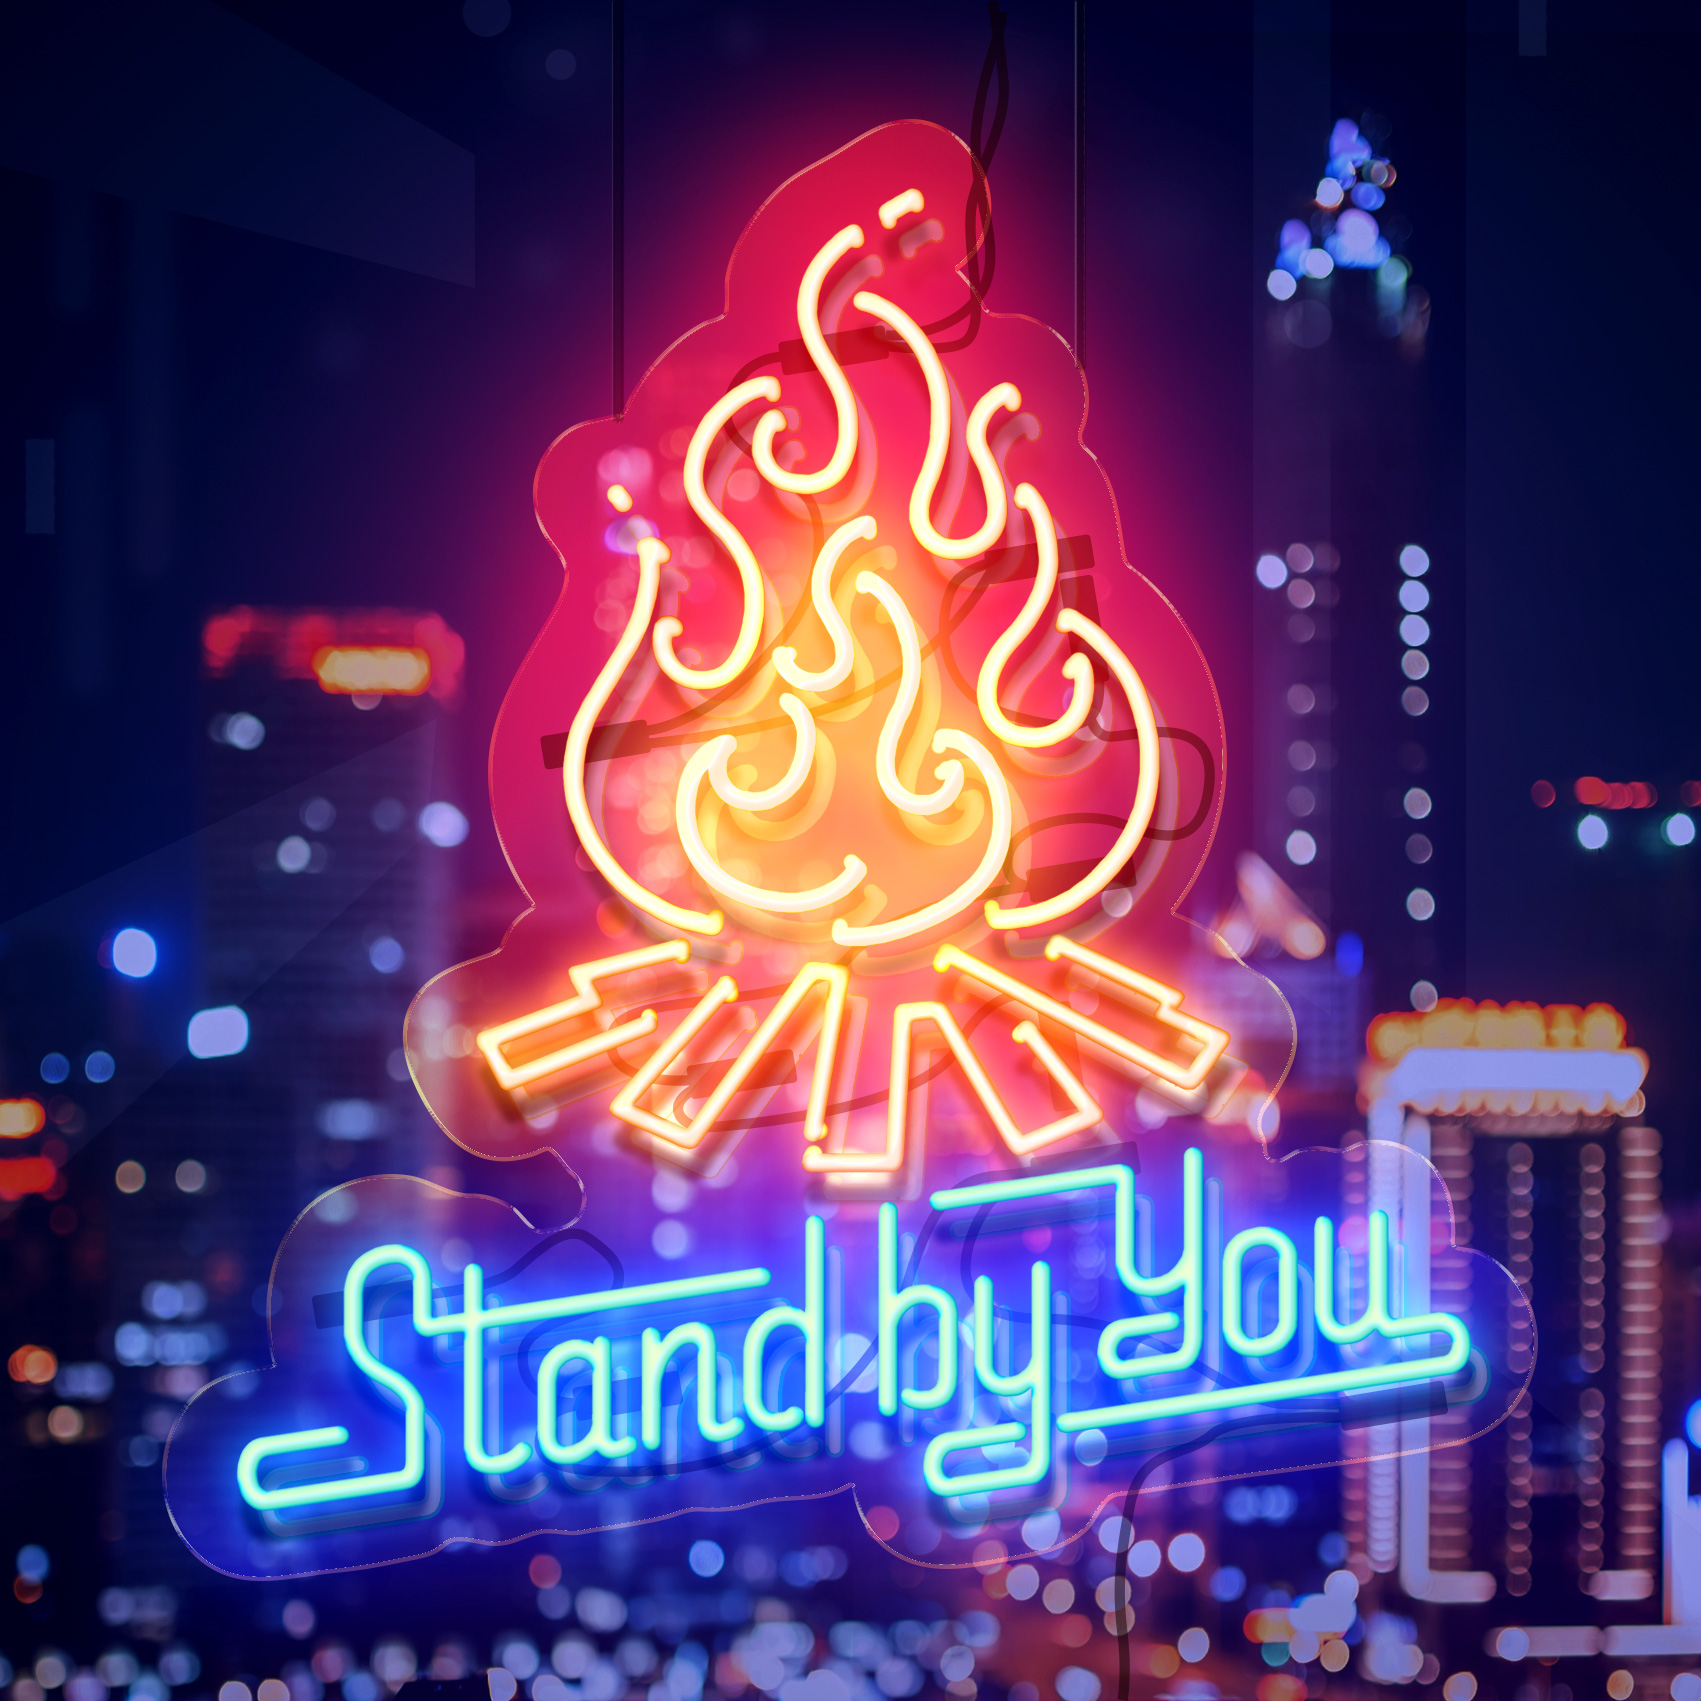 Official髭男dism、待望のニューリリース、「Stand By You EP」が10月